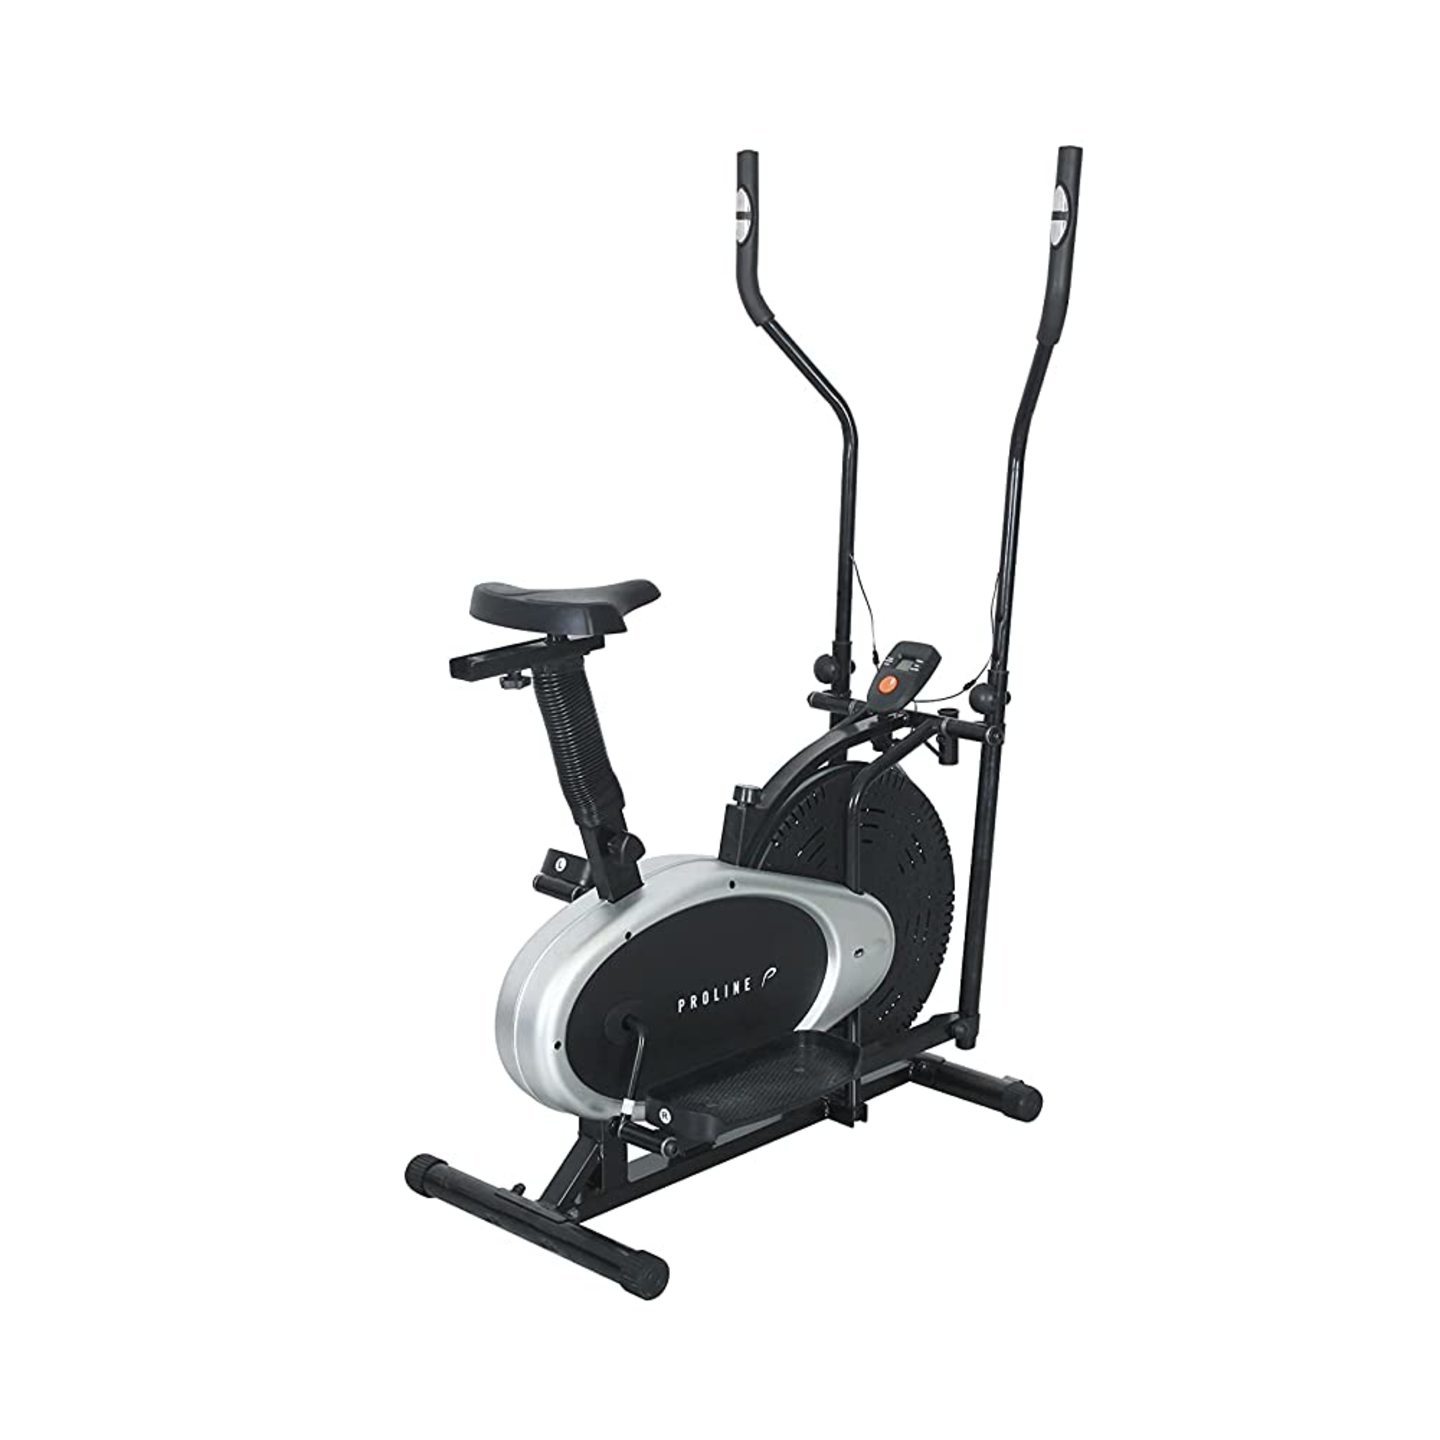 Proline Fitness Multipurpose Orbitrek cycle with cross trainer for exercise and fitness colour black & grey